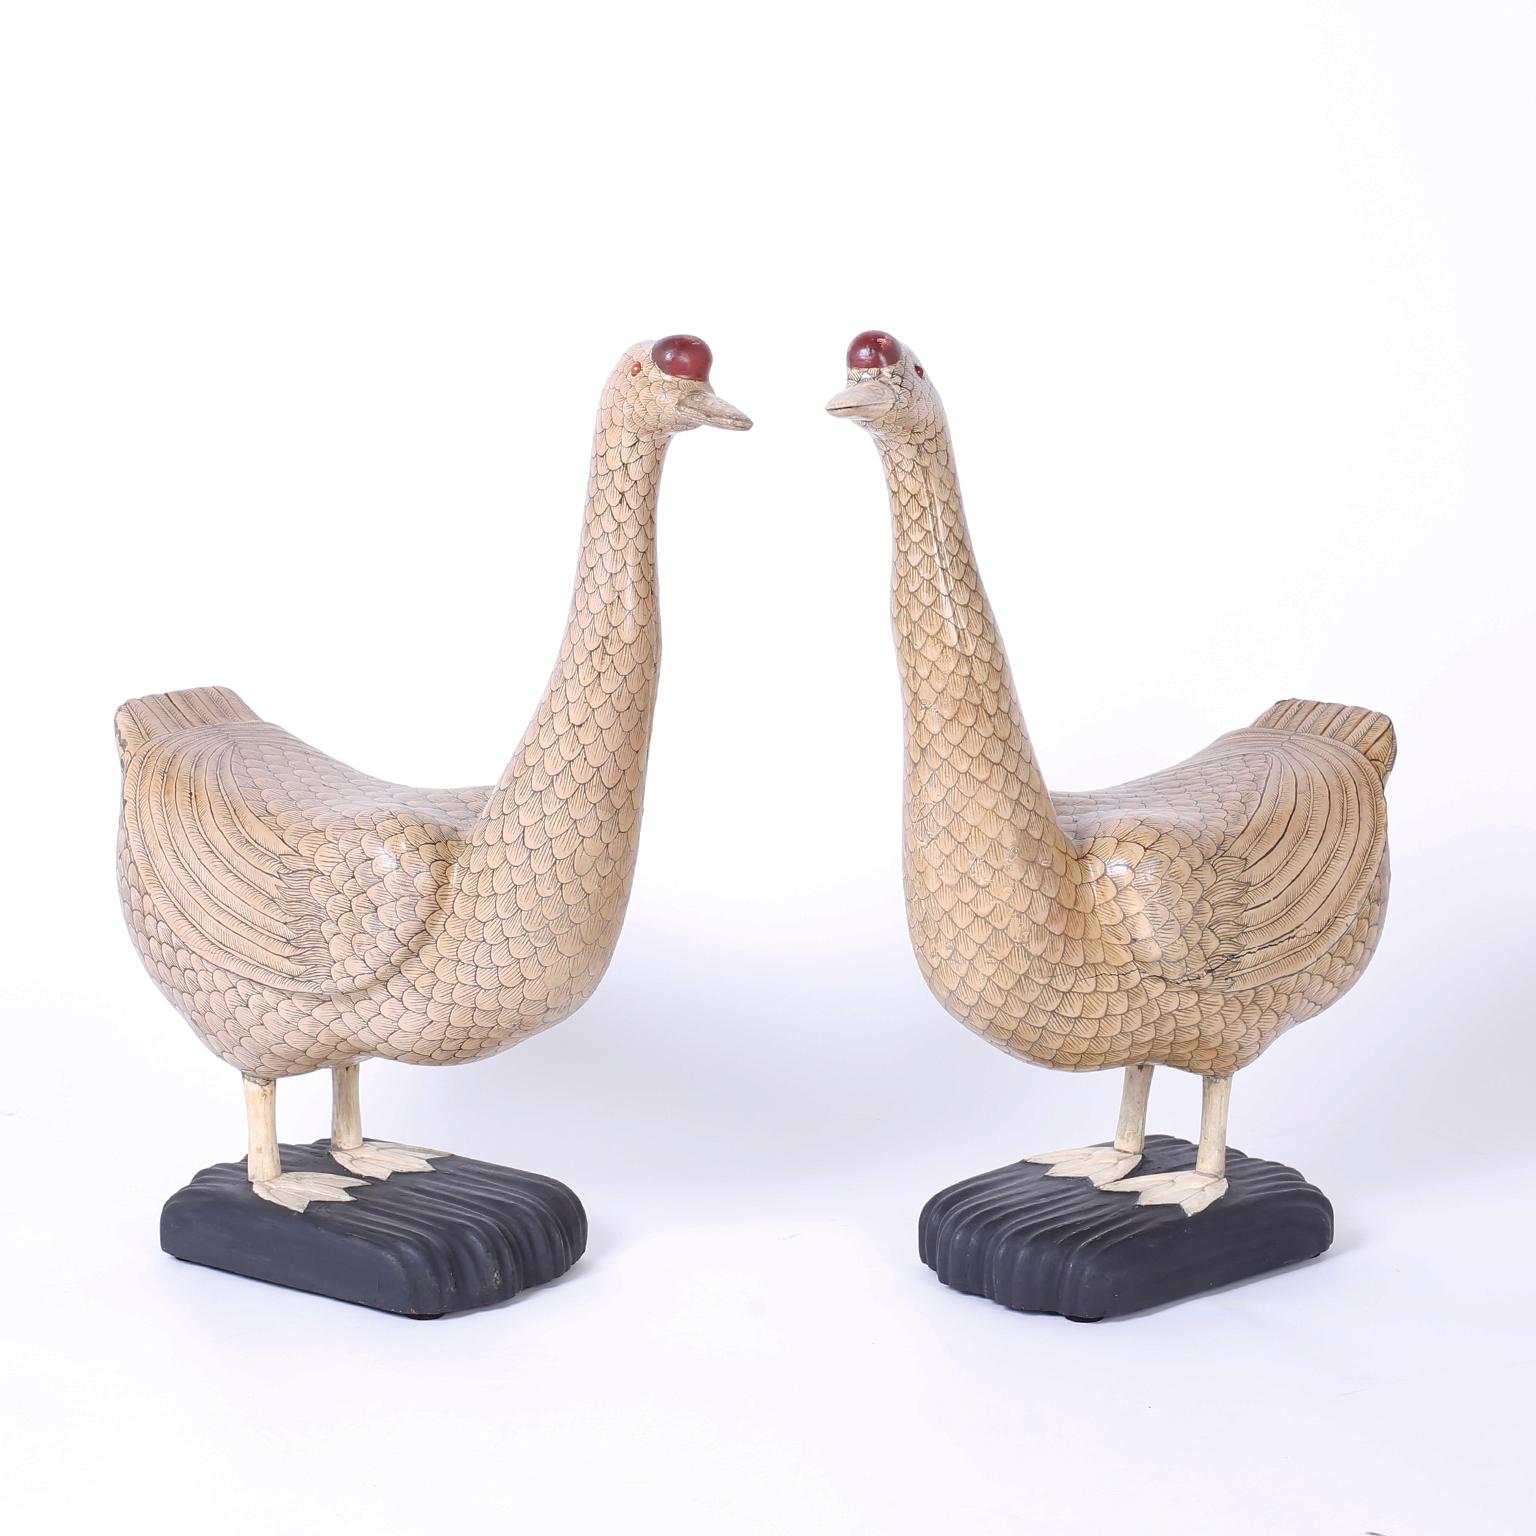 Perky pair of Chinese geese with amusing expressions crafted in carved wood and painted with stylized feathers. Featuring carved bone beaks and feet.